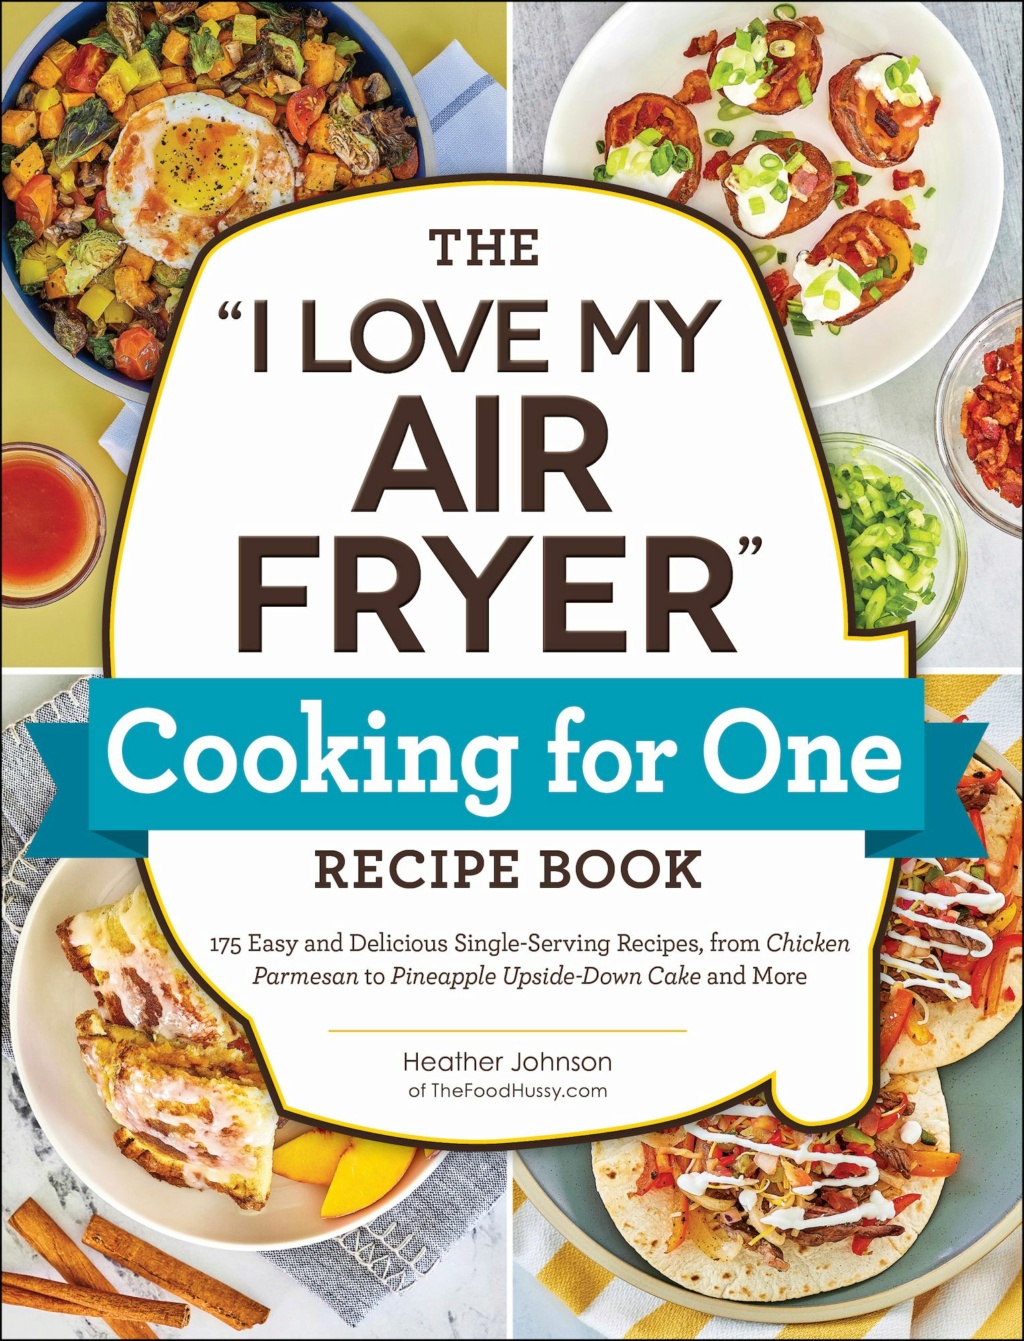 The "I Love My Air Fryer" Cooking for One Recipe Book ("I Love My" Cookbook) 3enaog10